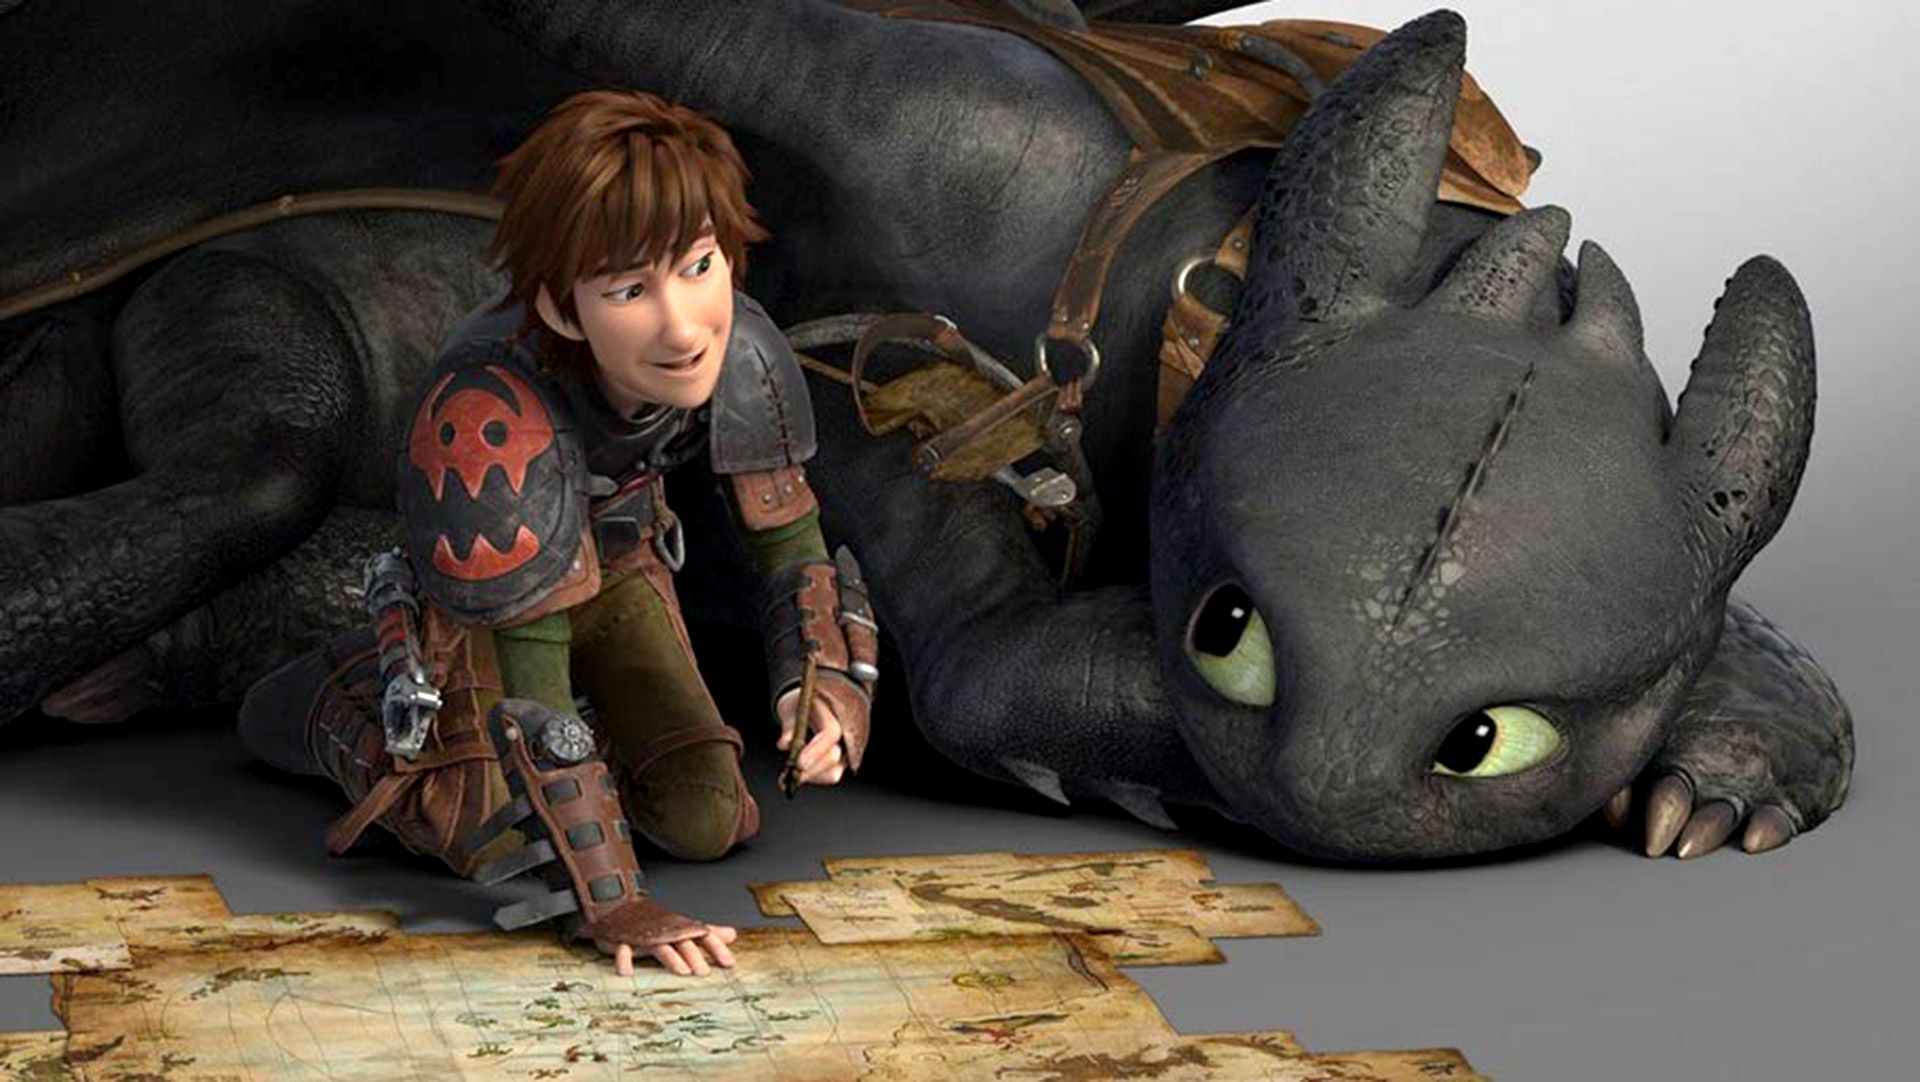 How To Train Your Dragon 2 Toothless Glowing - wallpaper